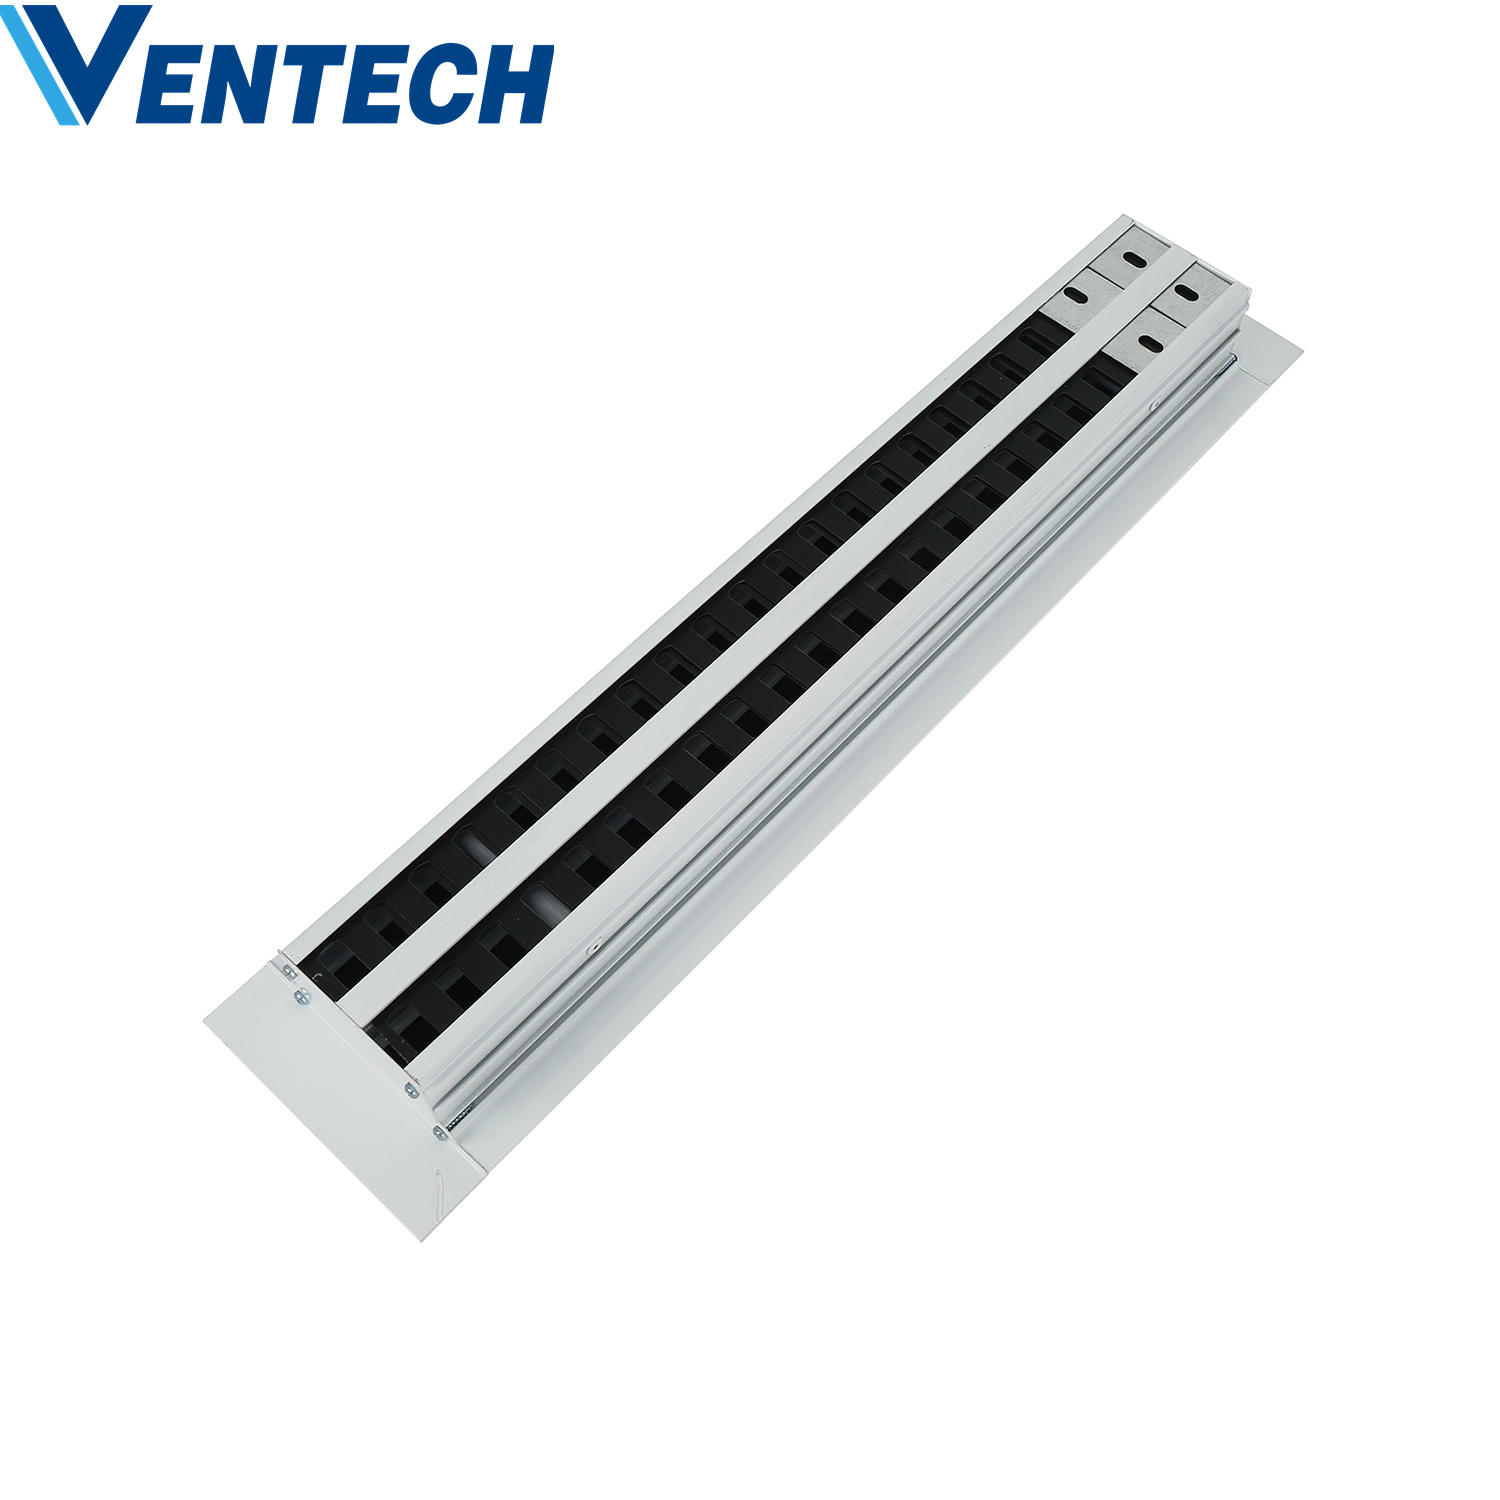 Hvac Aluminum Exhaust Supply Air Duct Linear Slot Price Ventilation Conditioning Ceiling Linear Slot Diffusers With Plenum Box